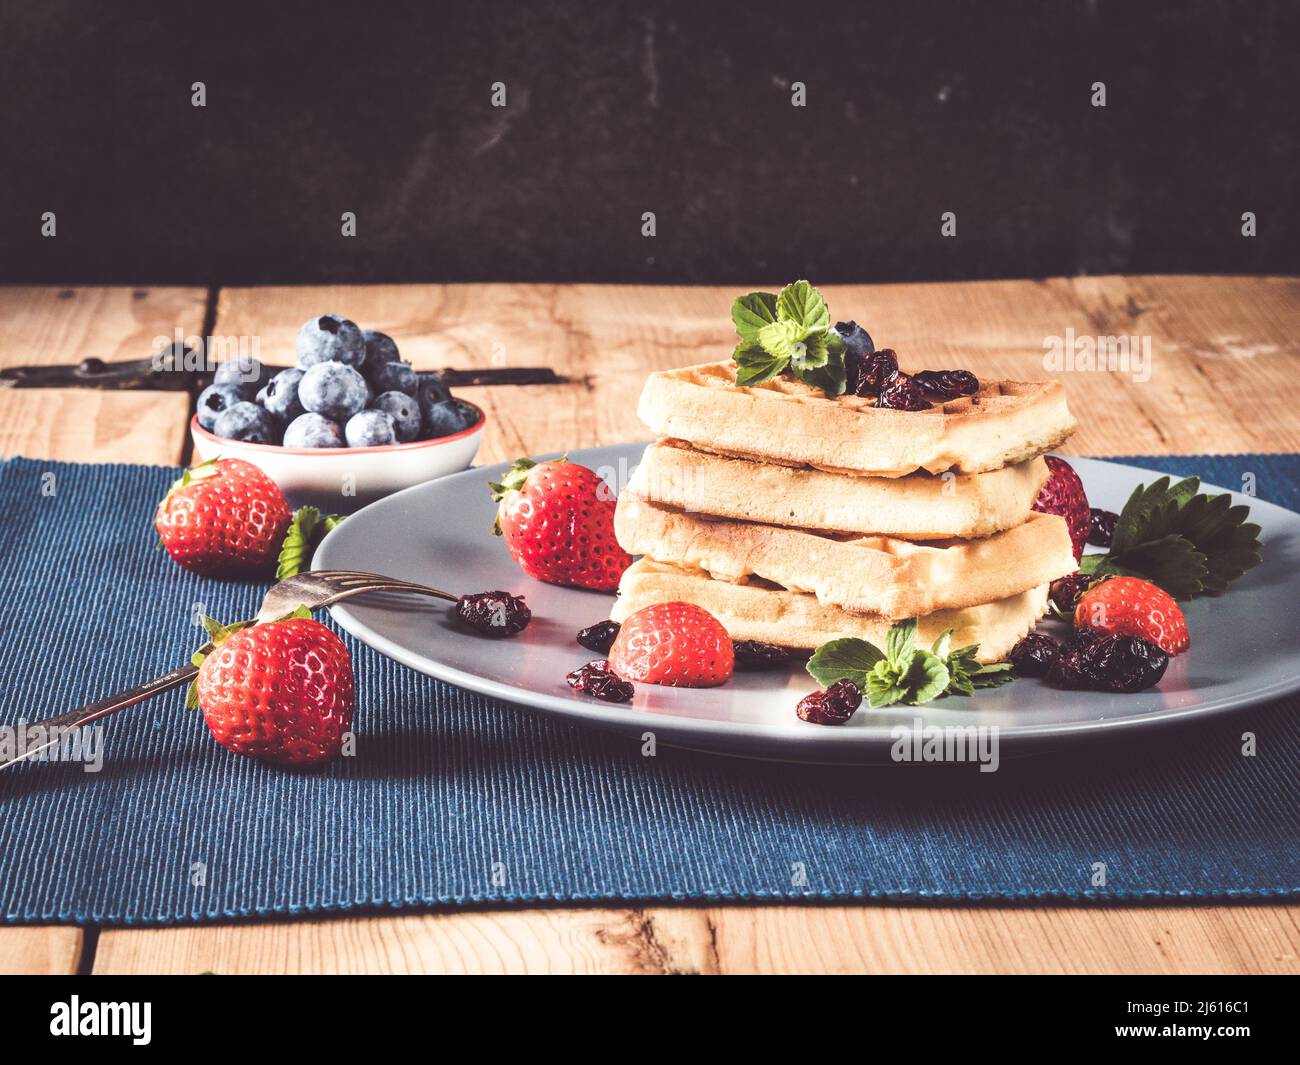 homemade waffle stack decorated with blueberries, strwaberries, cranberries and mint; rustic wooden table with placemats and bowls Stock Photo